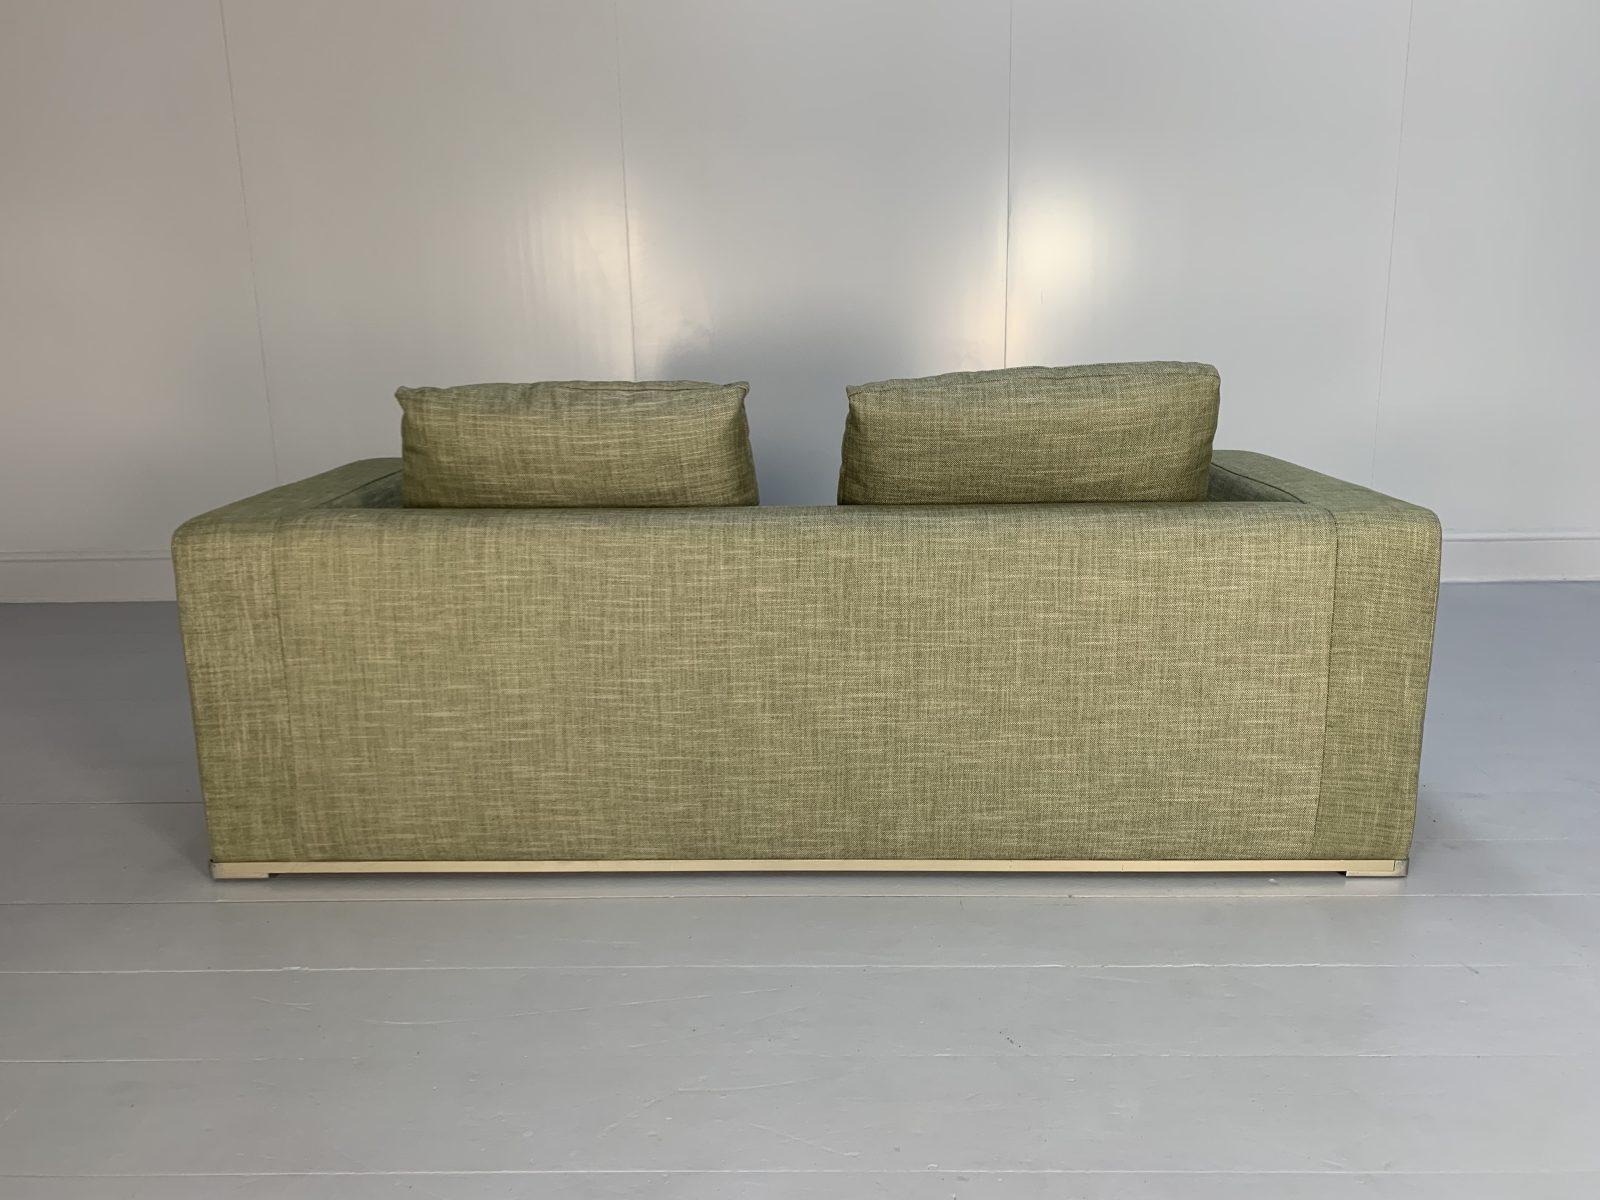 Contemporary Pair of B&B Italia “Omnia” Sofas, 2.5-Seat, in Pale Green Linen For Sale